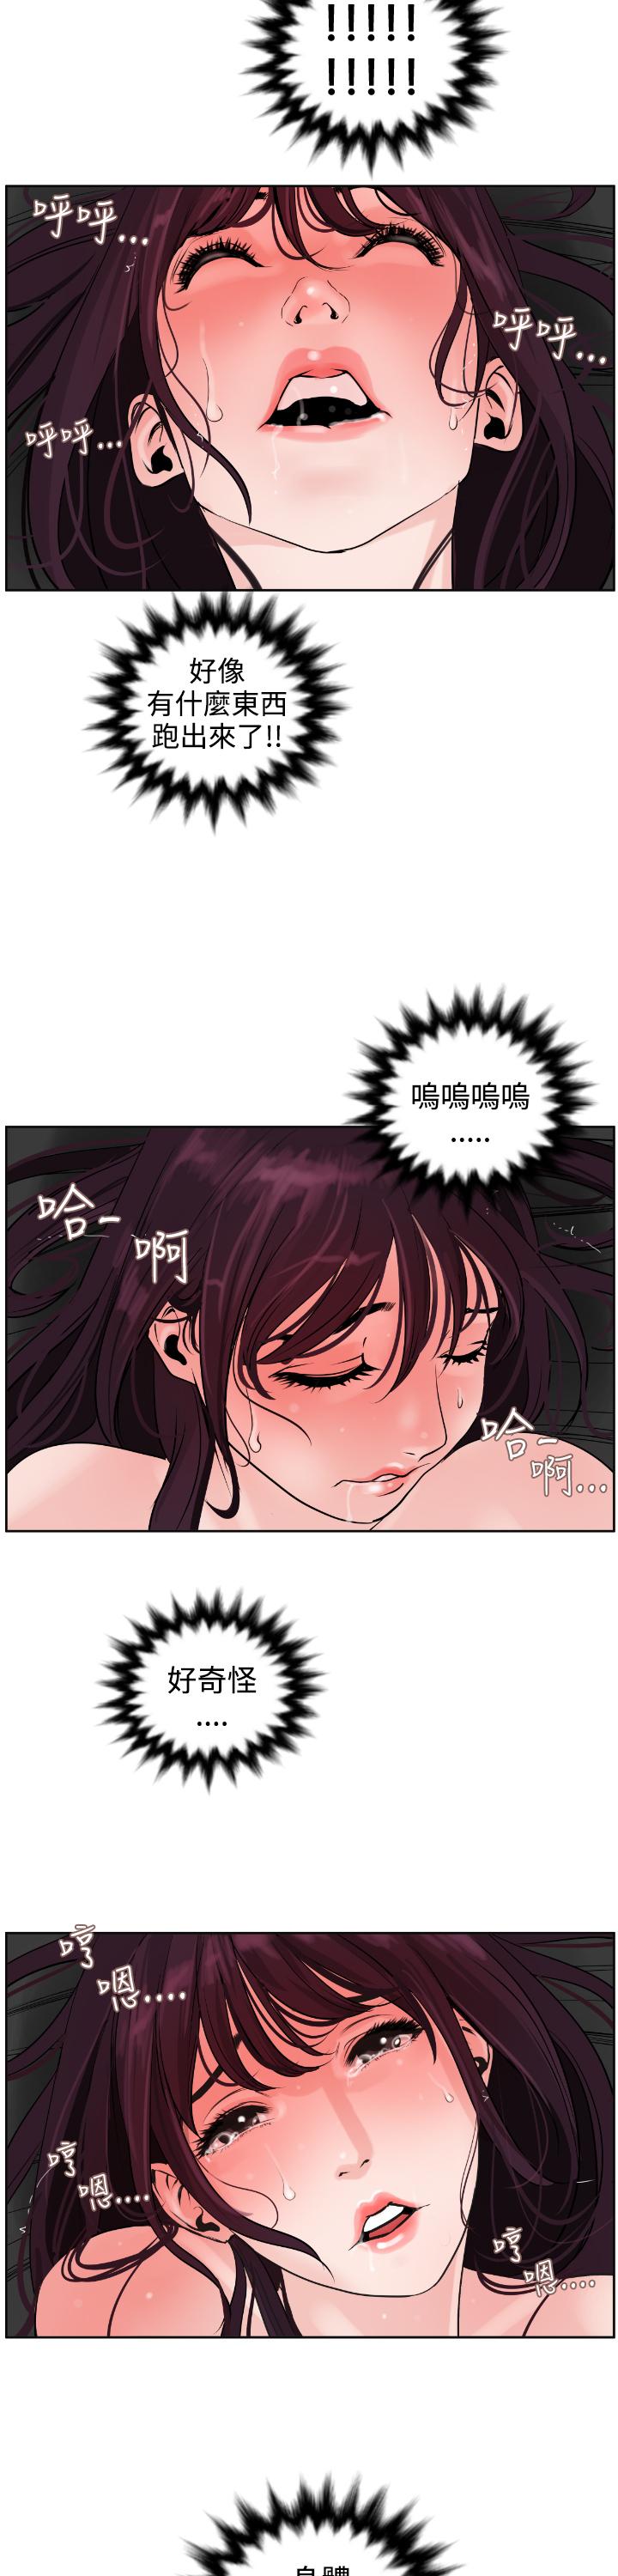 Desire King (慾求王) Ch.1-12 (chinese) 227